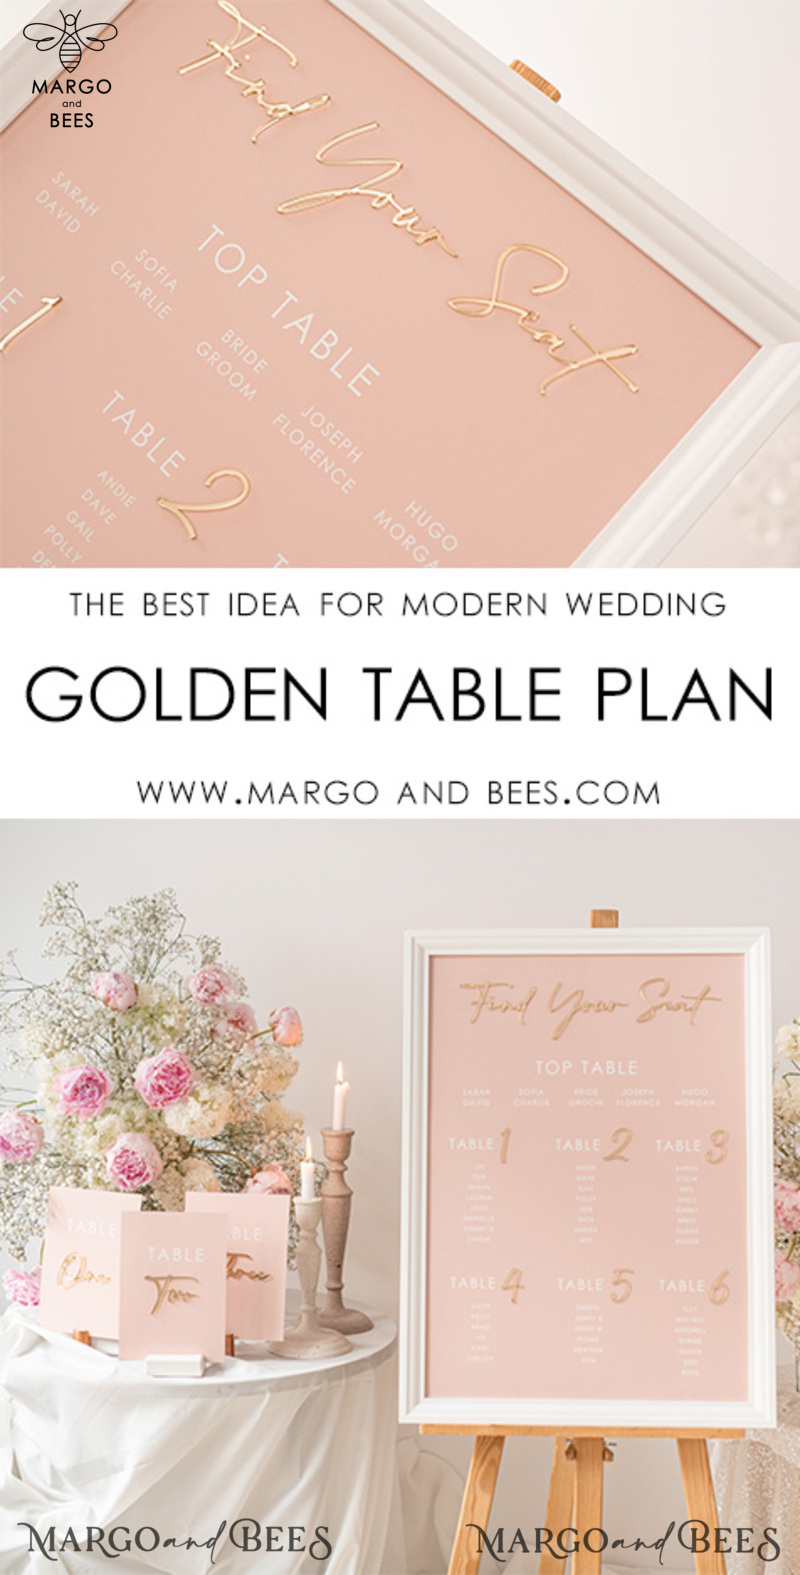 Blush and Gold Modern Acrylic Seating Chart, 3d Elegant Find Your Seat - Seating Plan , Wedding Table Plan in White Frame, Wedding Decoration with golden letters - Reception Signage - Custom Ceremony Sign BpPXSet-2